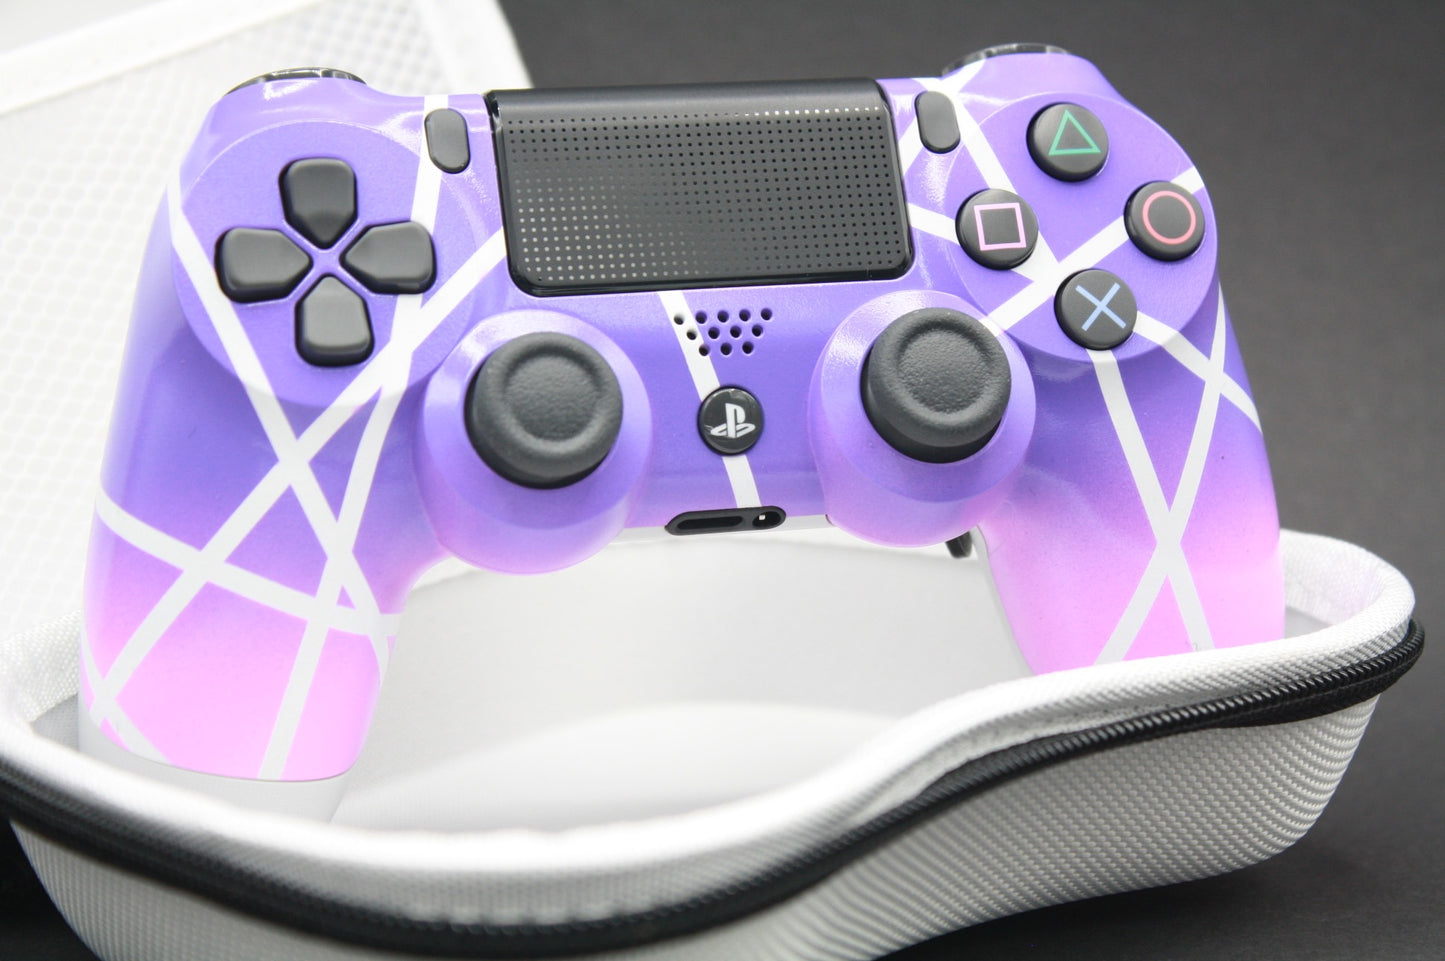 PS4 Controller "Hectic Pink" mit Zweier-Paddles